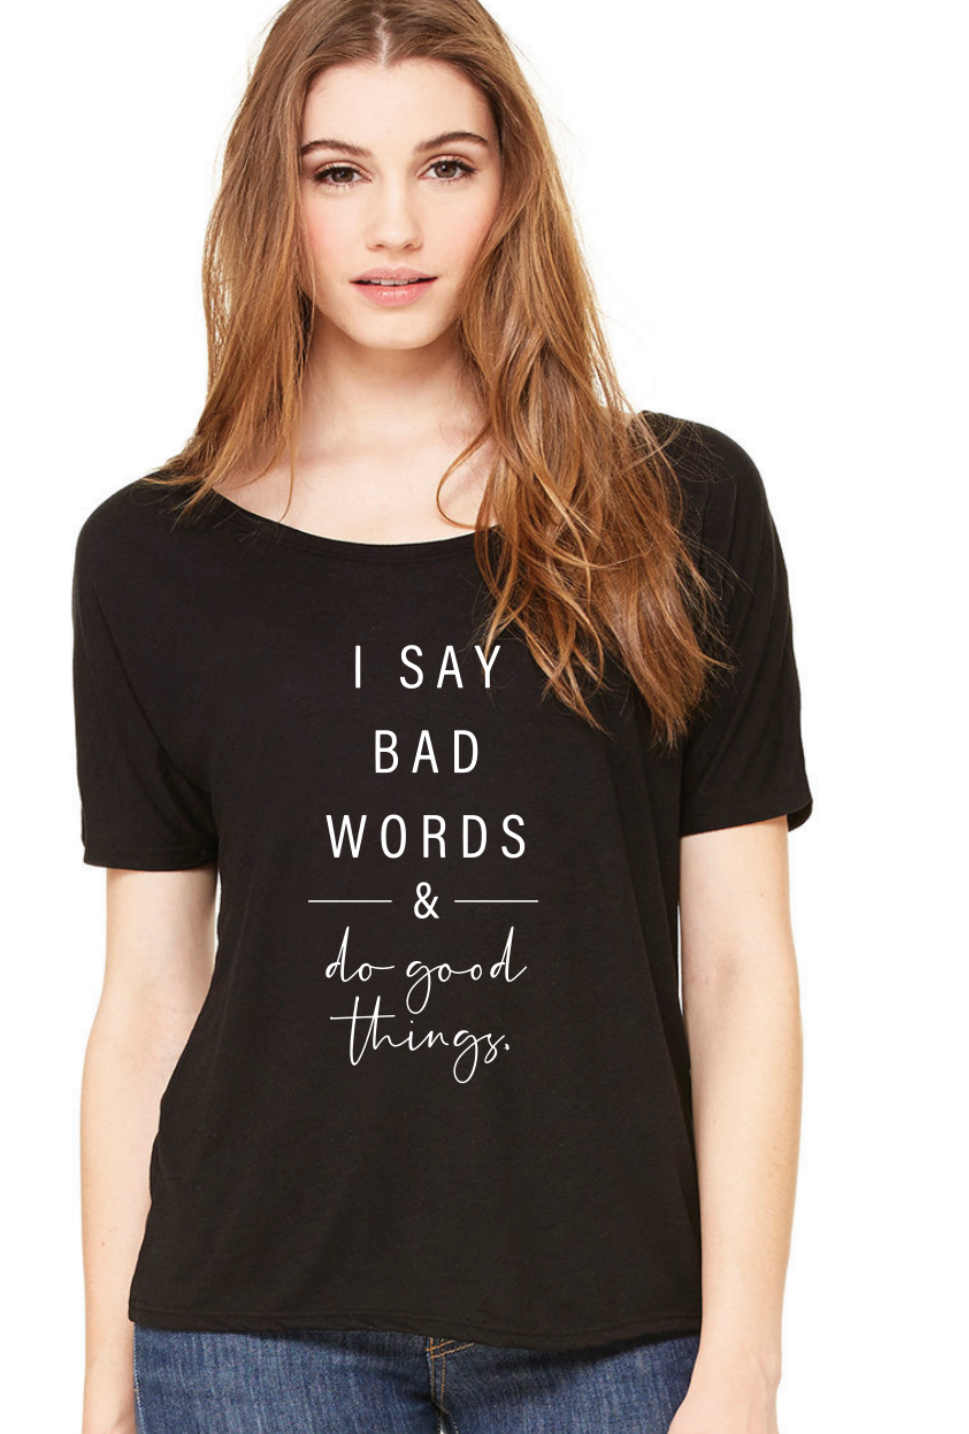 I Say Bad Words & Do Good Things slouchy tee